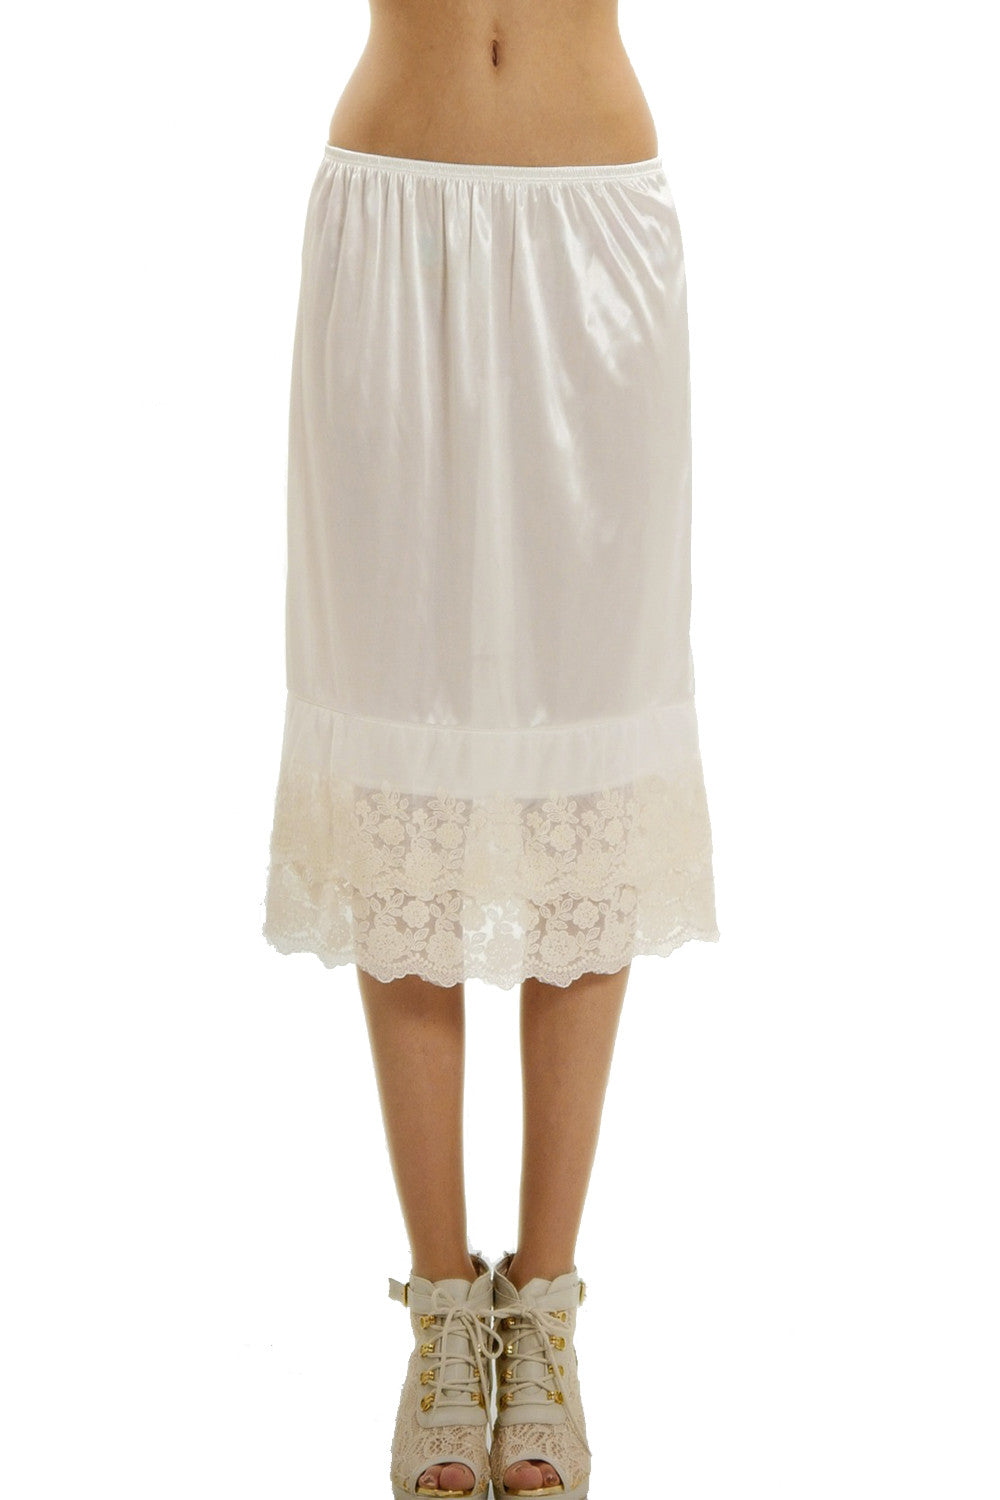 Melody extra length double lace half slip skirt extender - 24" length - Shop Lev